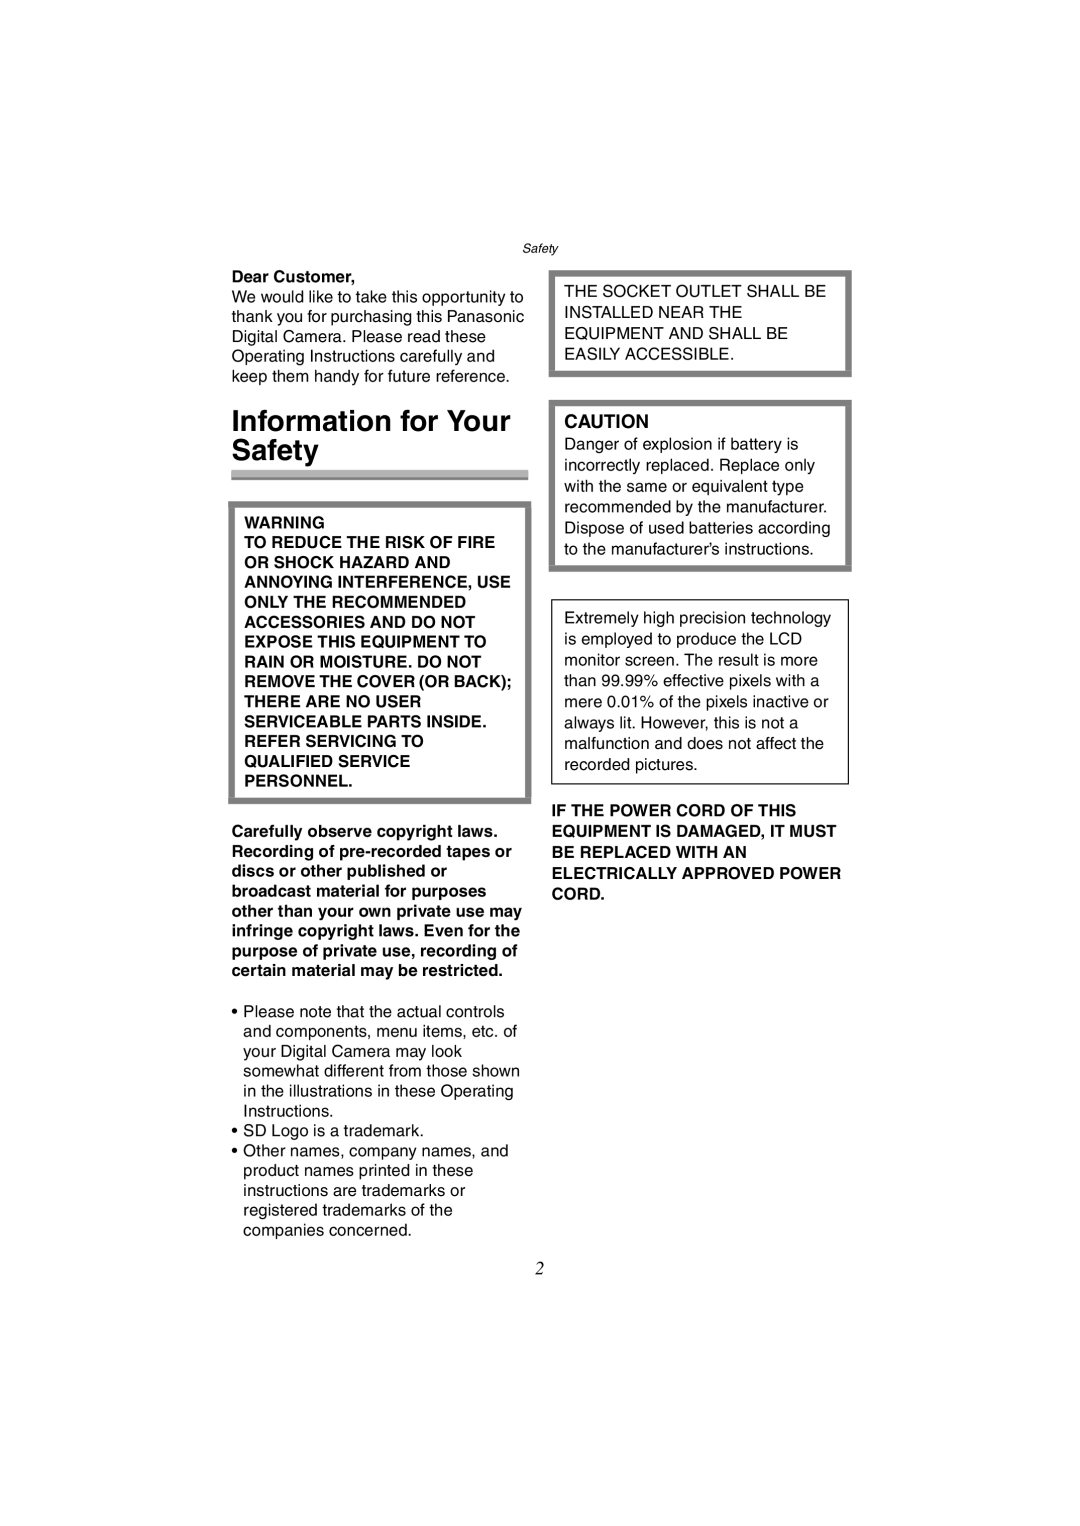 Panasonic DMC-FX5GN, DMC-FX1GN operating instructions Information for Your Safety, Dear Customer 